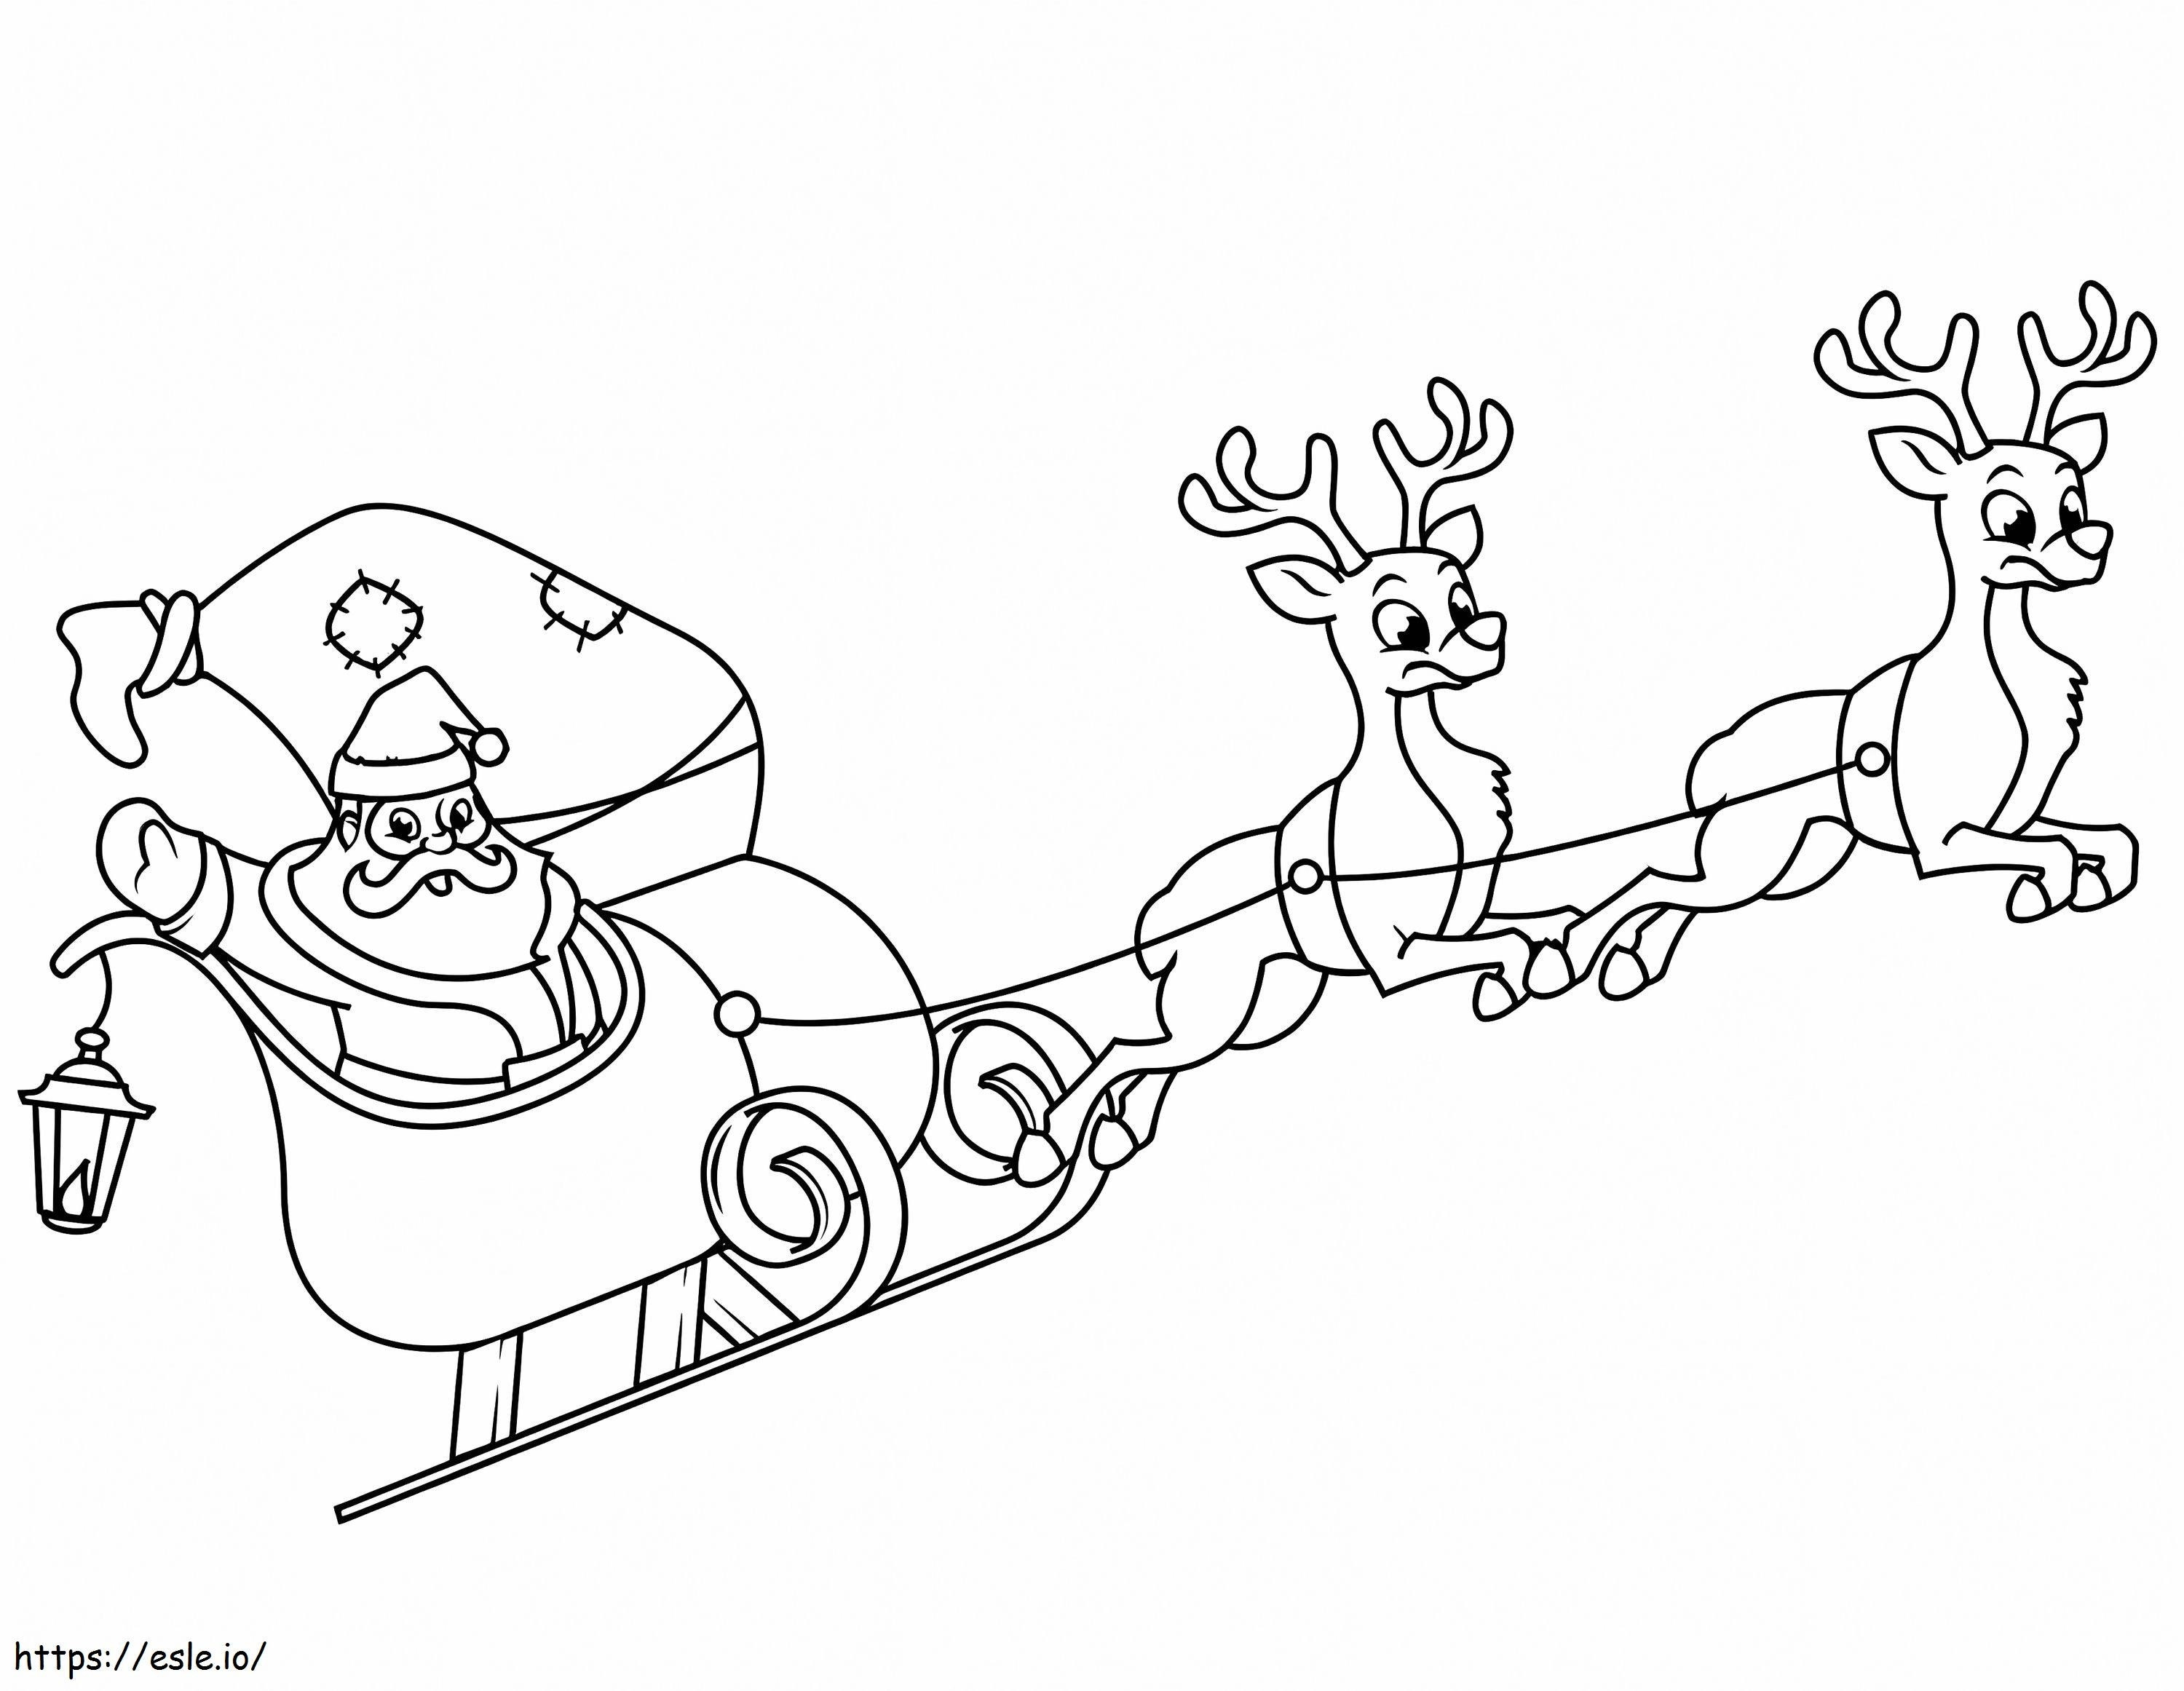 Santa Claus Comfortably Seated On coloring page